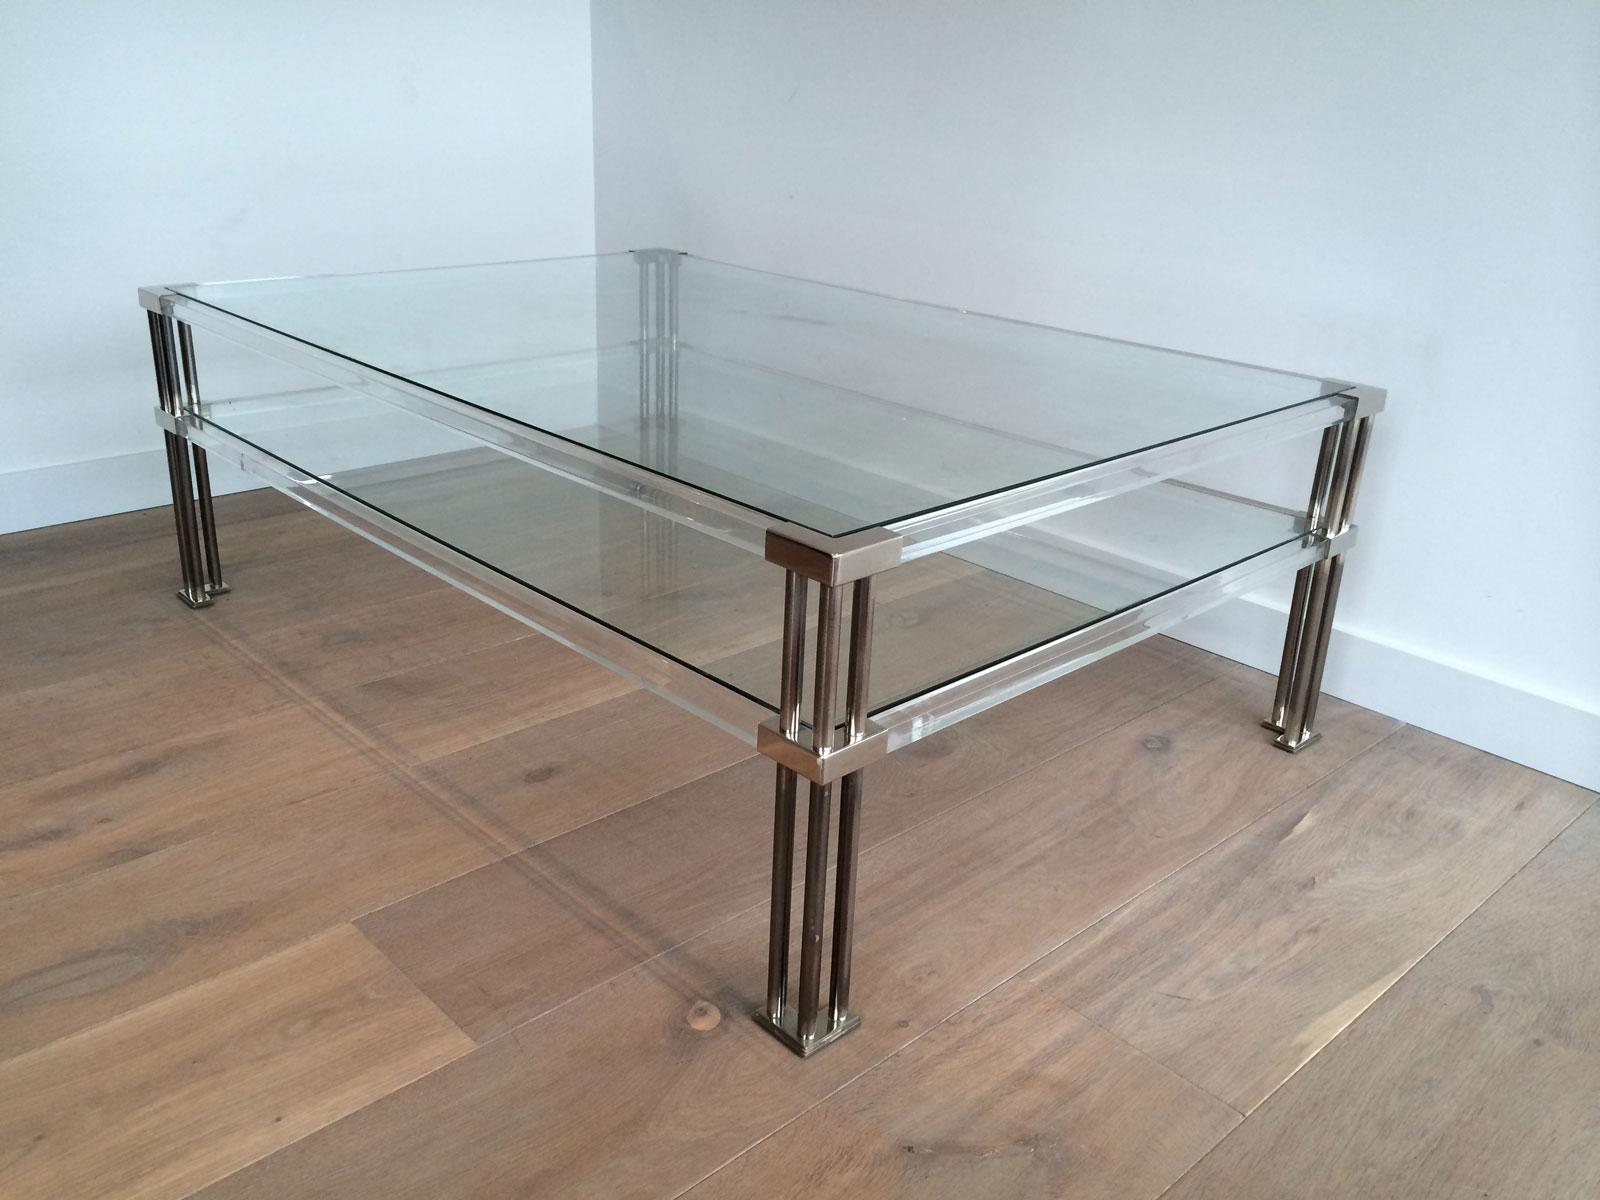 This large modernist coffee table is made of a Lucite structure with triple chrome legs. This cocktail table has 2 glass shelves. This is a nice French design, circa 1970.